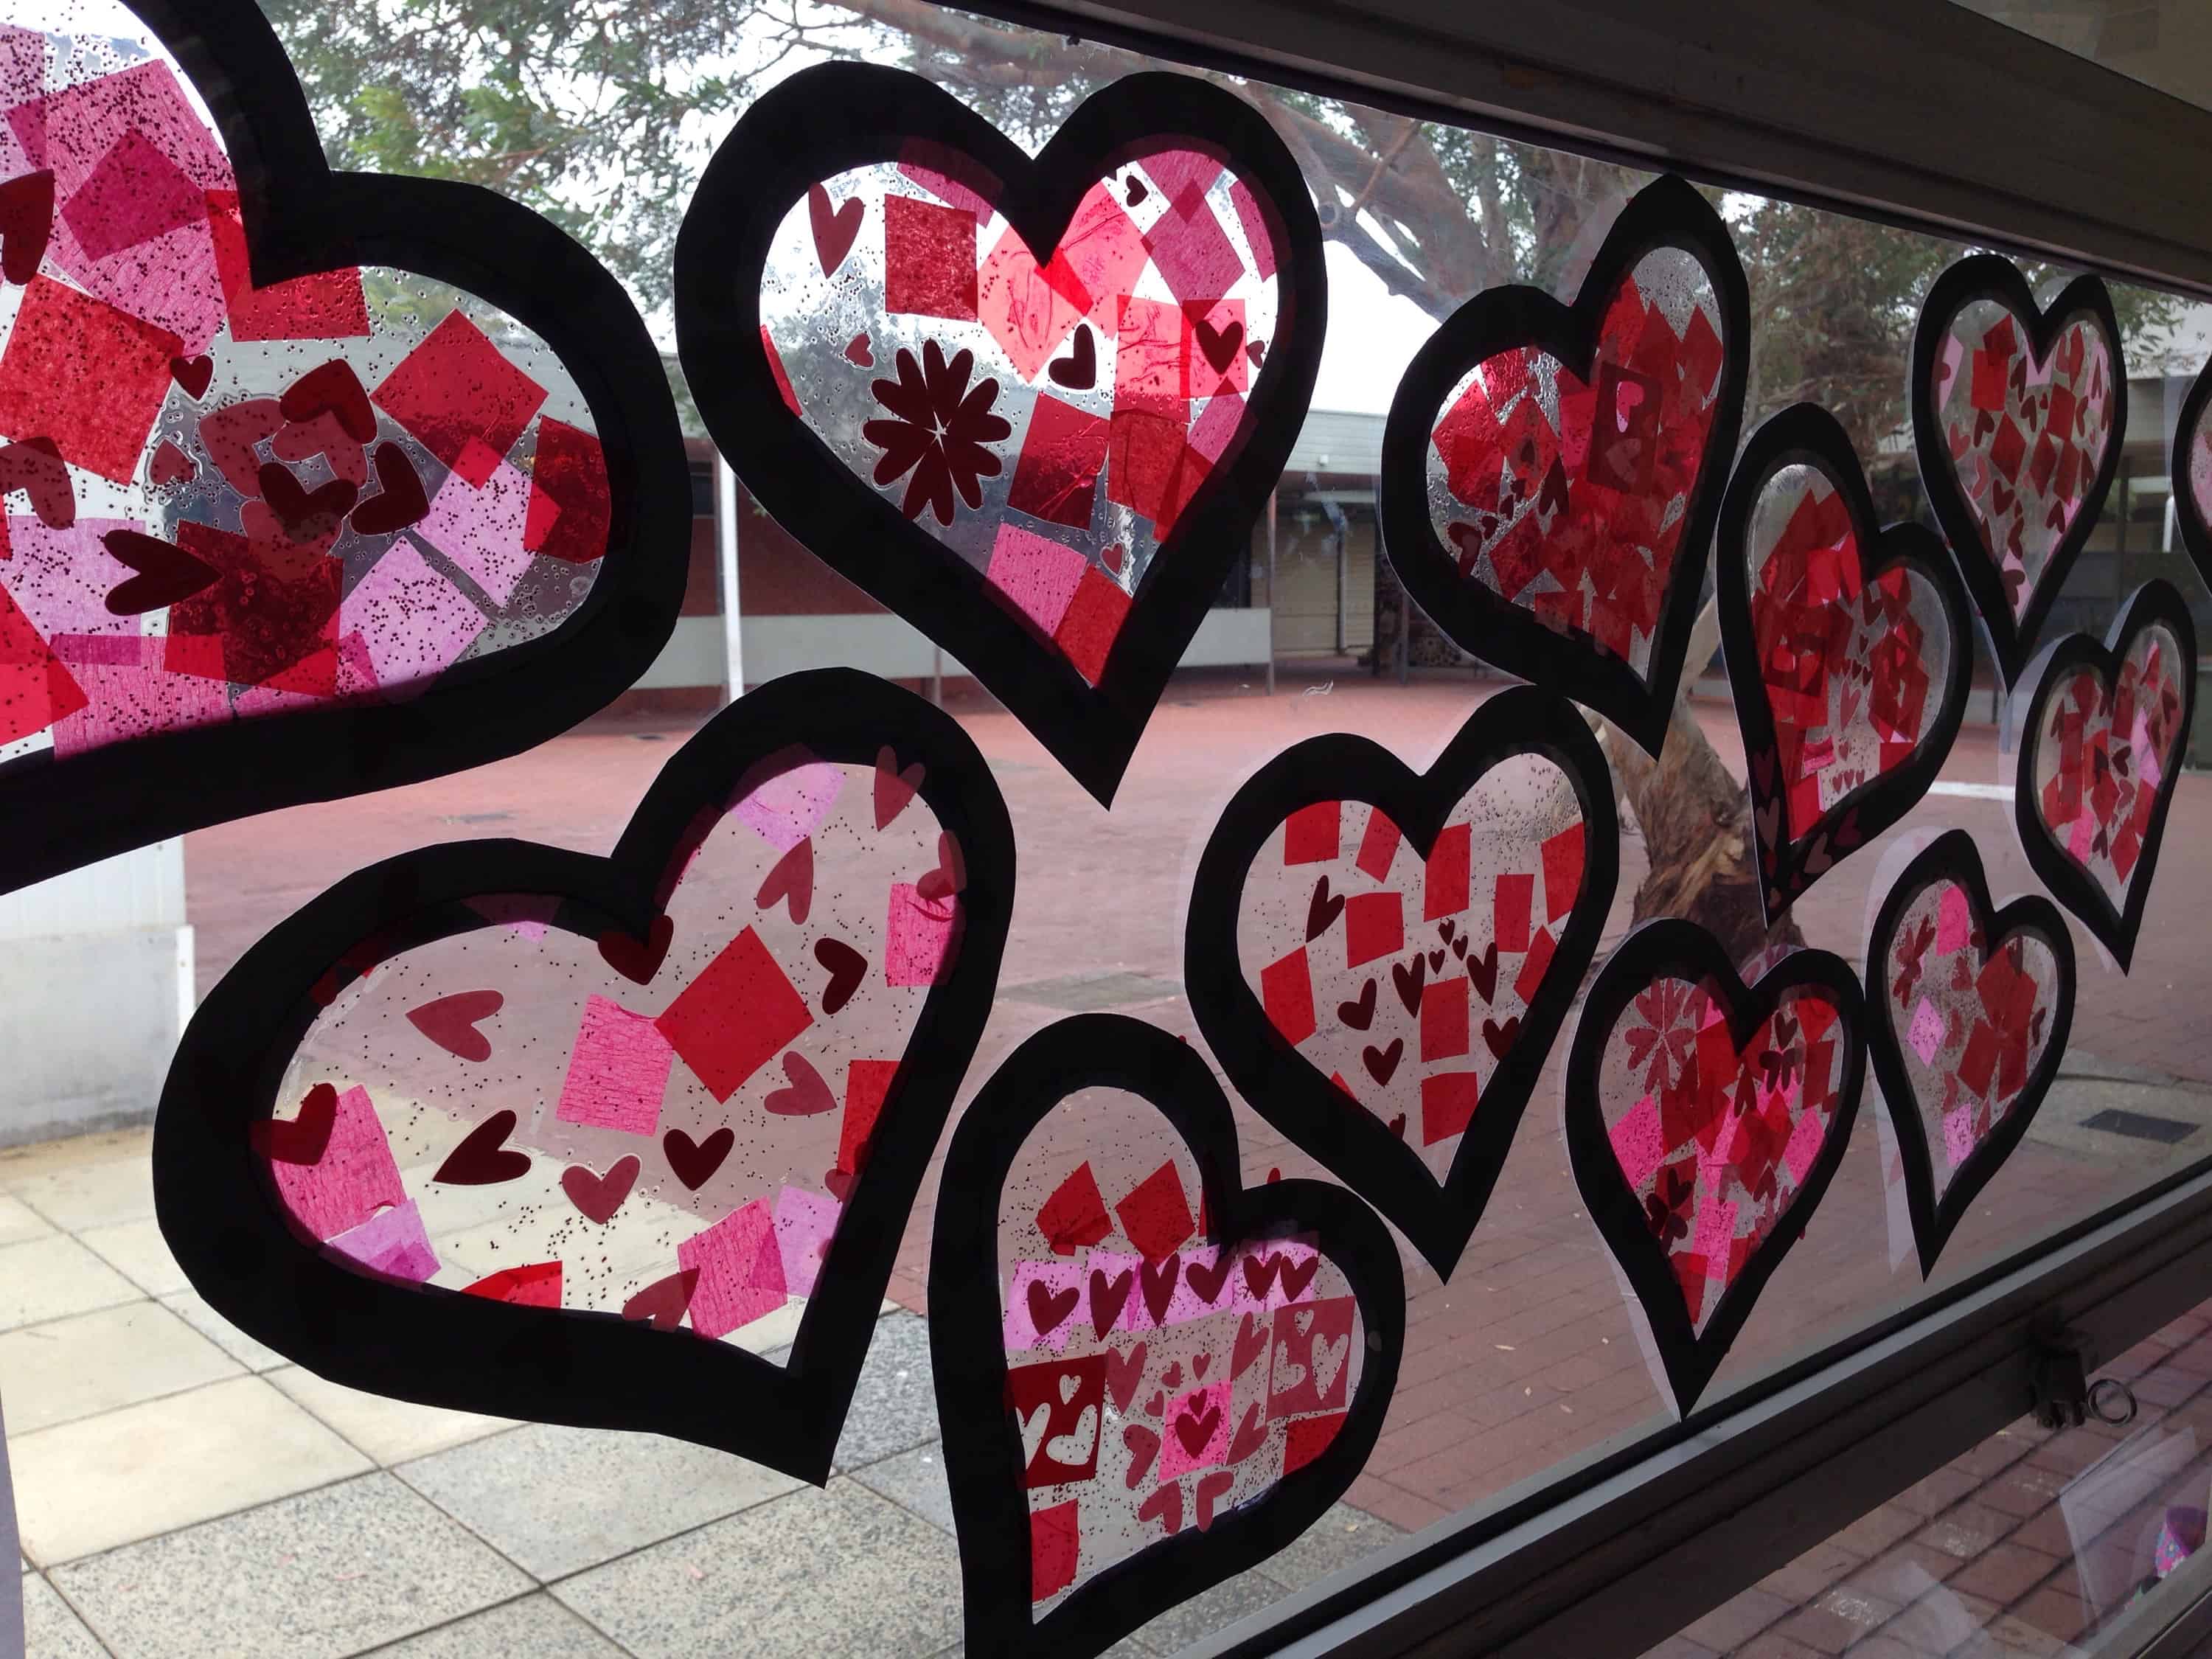 Cute Homemade Valentines Day Crafts for Kids' Classrooms